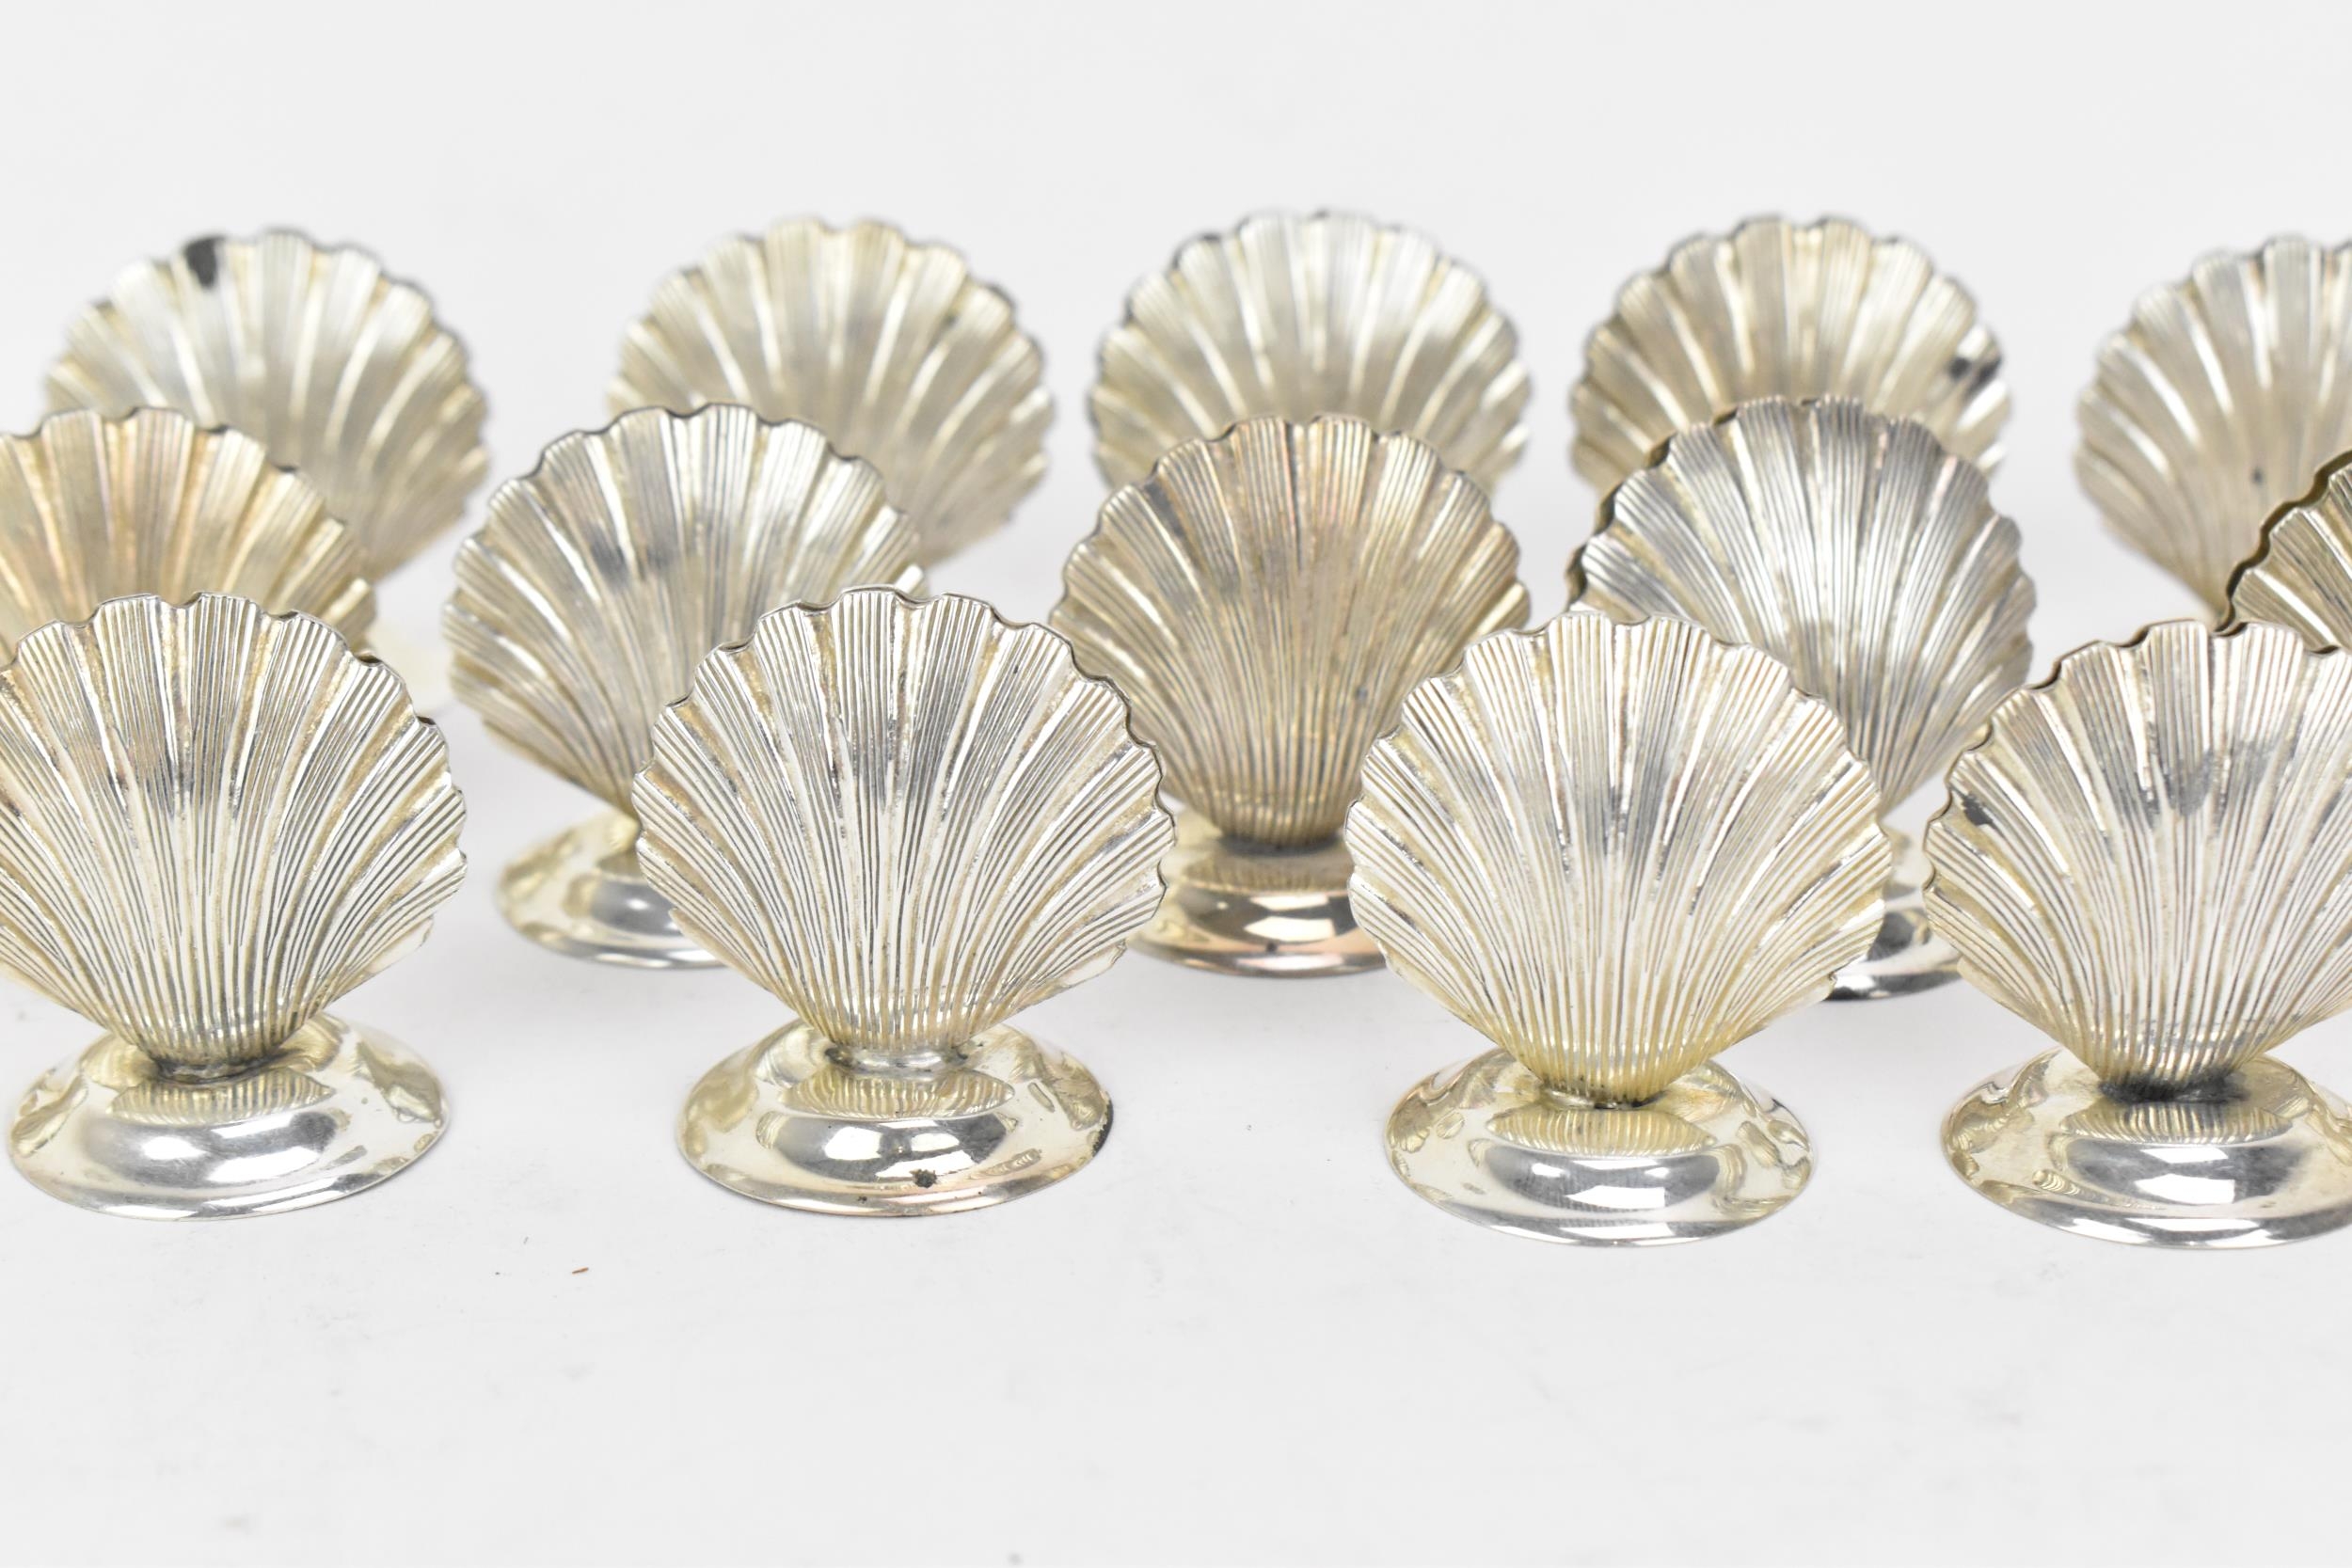 A set of sterling silver shell-shaped menu holders, or place names, each designed as a clam shell - Image 4 of 6